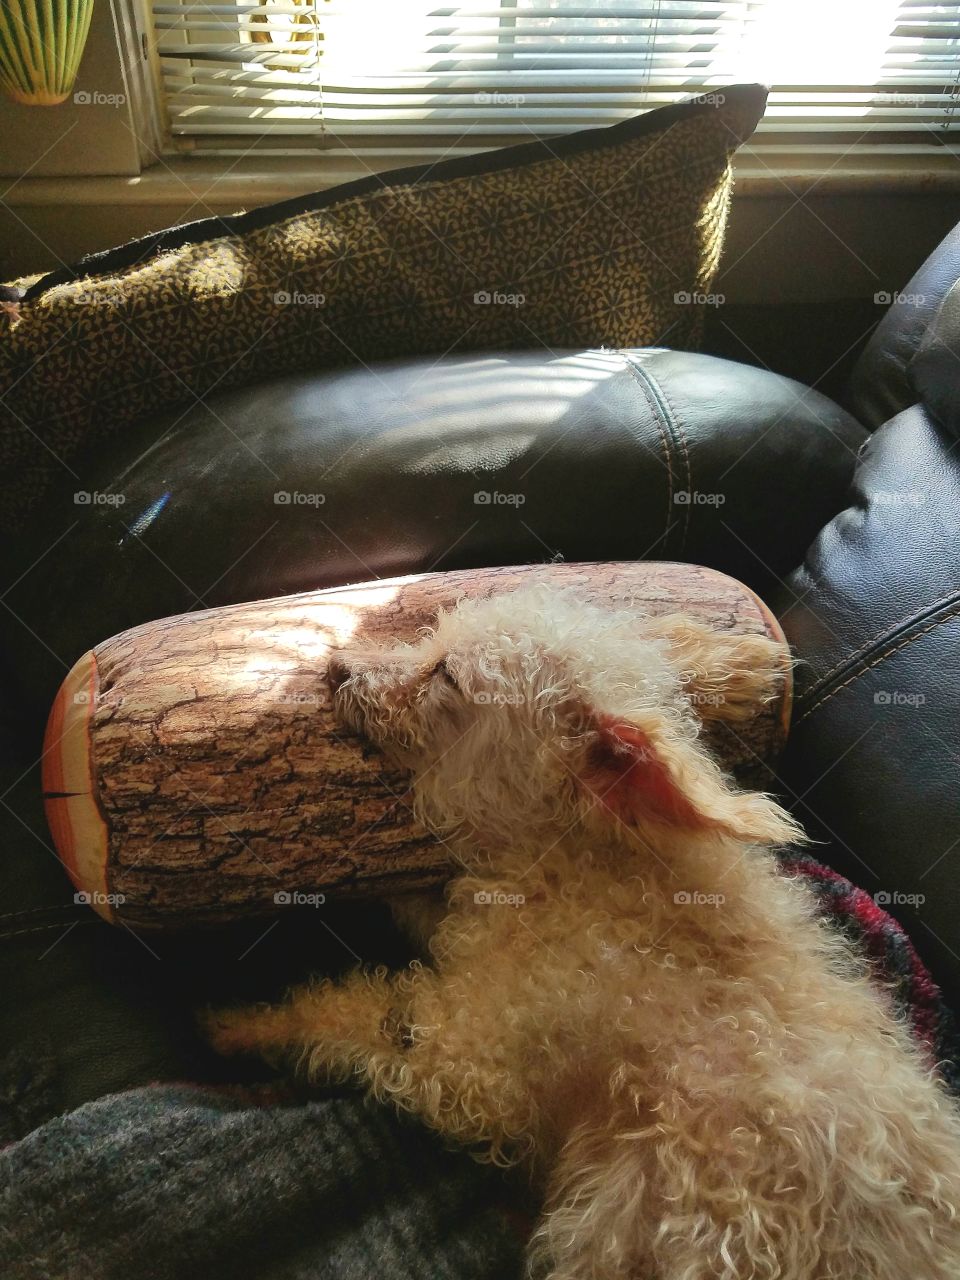 Poodle dog sleeping on couch on blanket & head on log beanbag pillow. Light from window blinds.